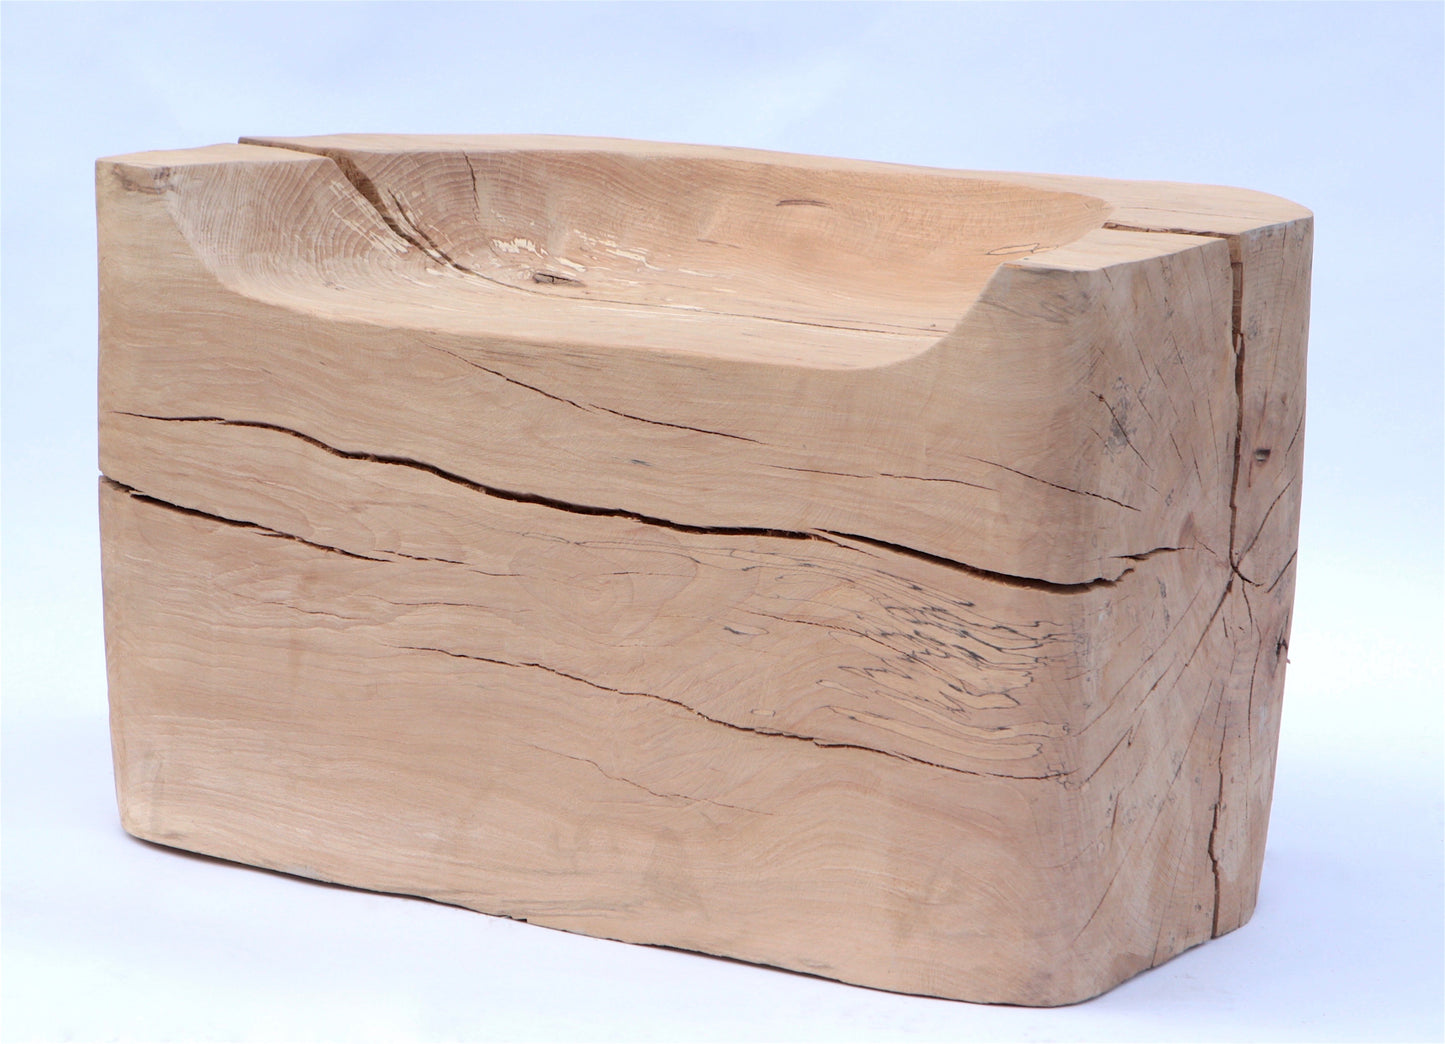 Spalted Beech Meditation Seat